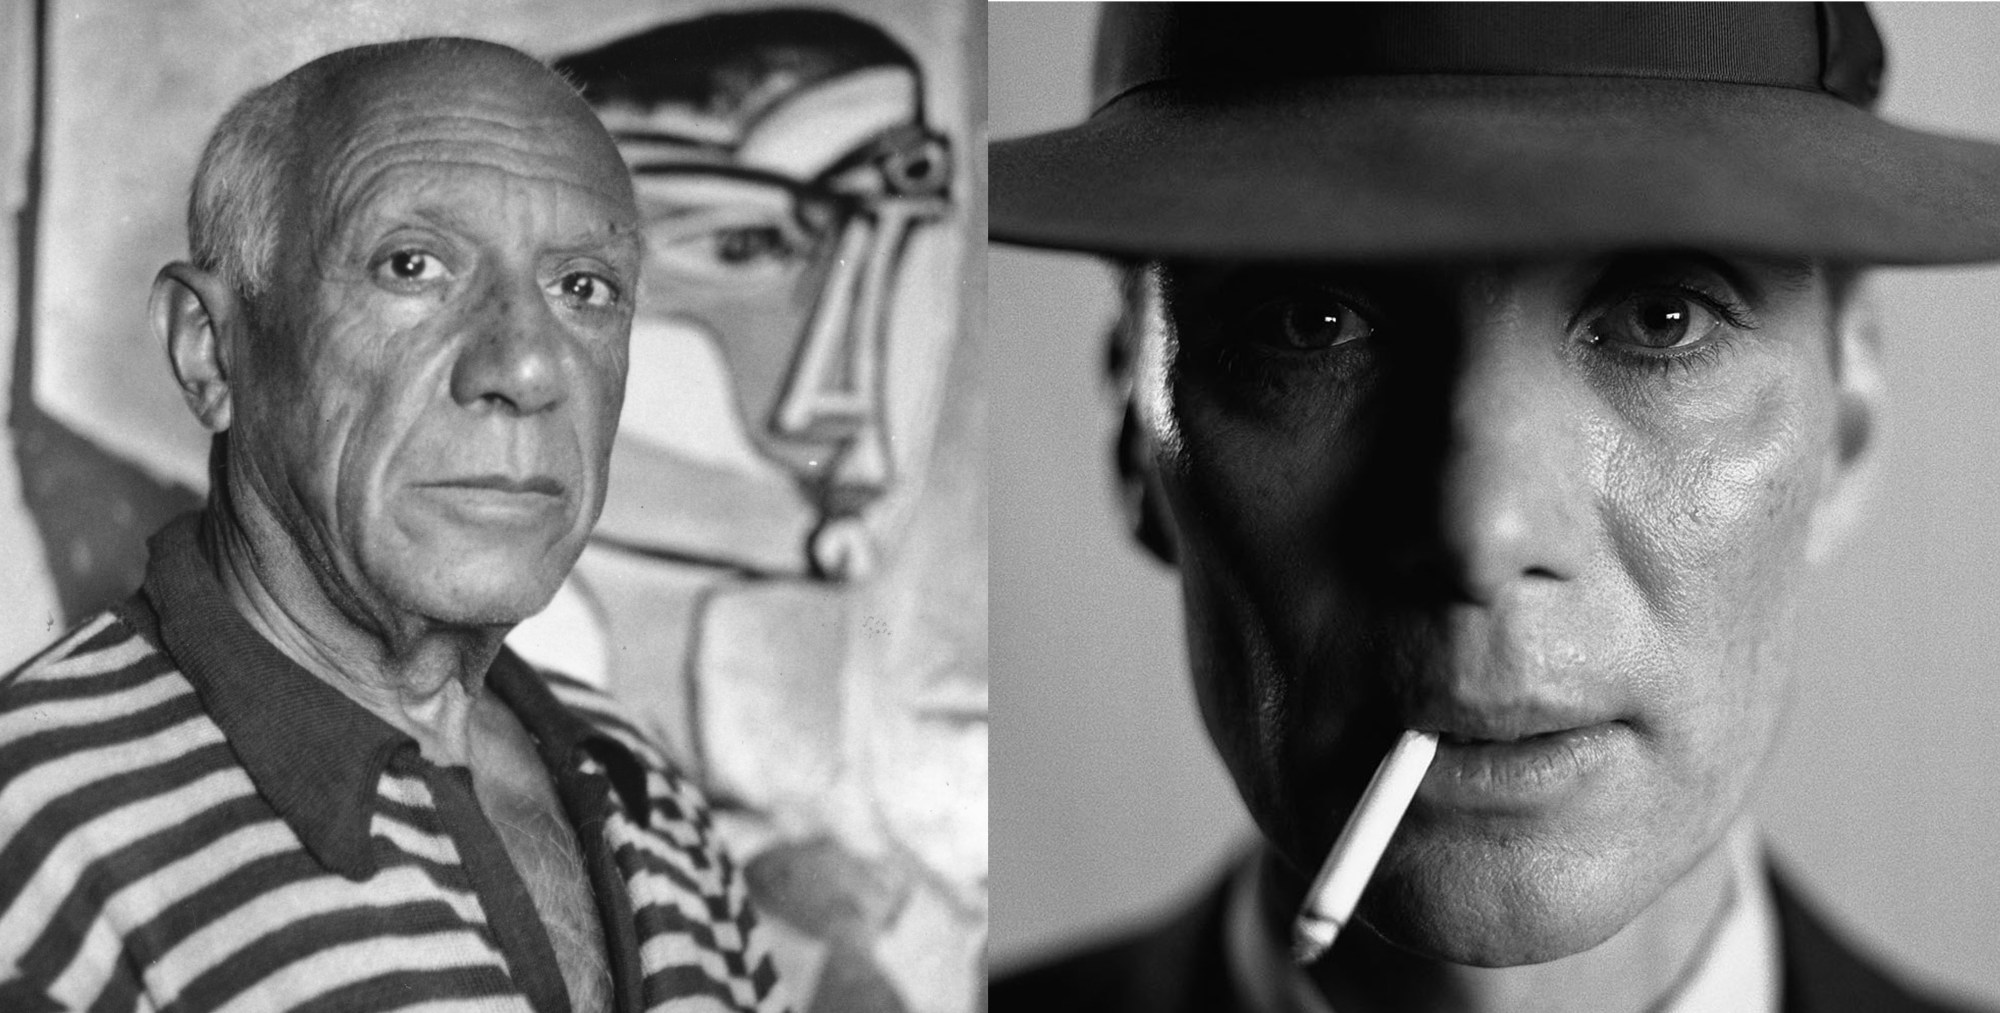 Diptych of two men in black and white. One wears a striped shirt and stands before a painting of a highly abstracted face, the other wears a bowler hat and has a cigarette dangling out of his mouth.